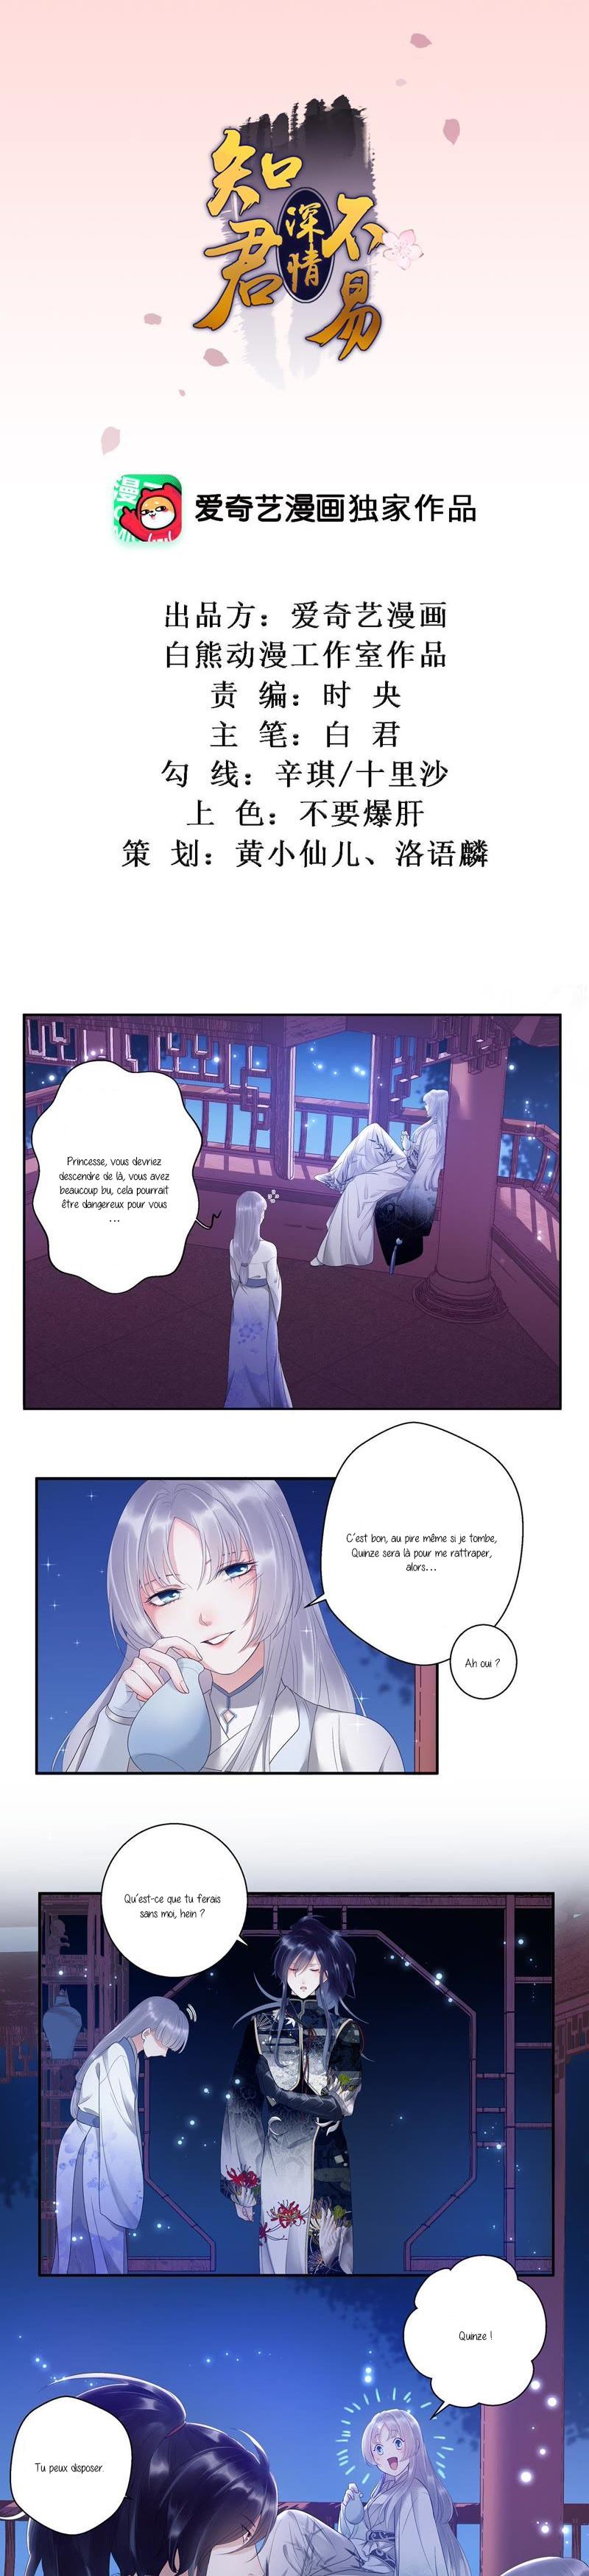 The Heart Will Break, But Broken Live On: Chapter 4 - Page 1